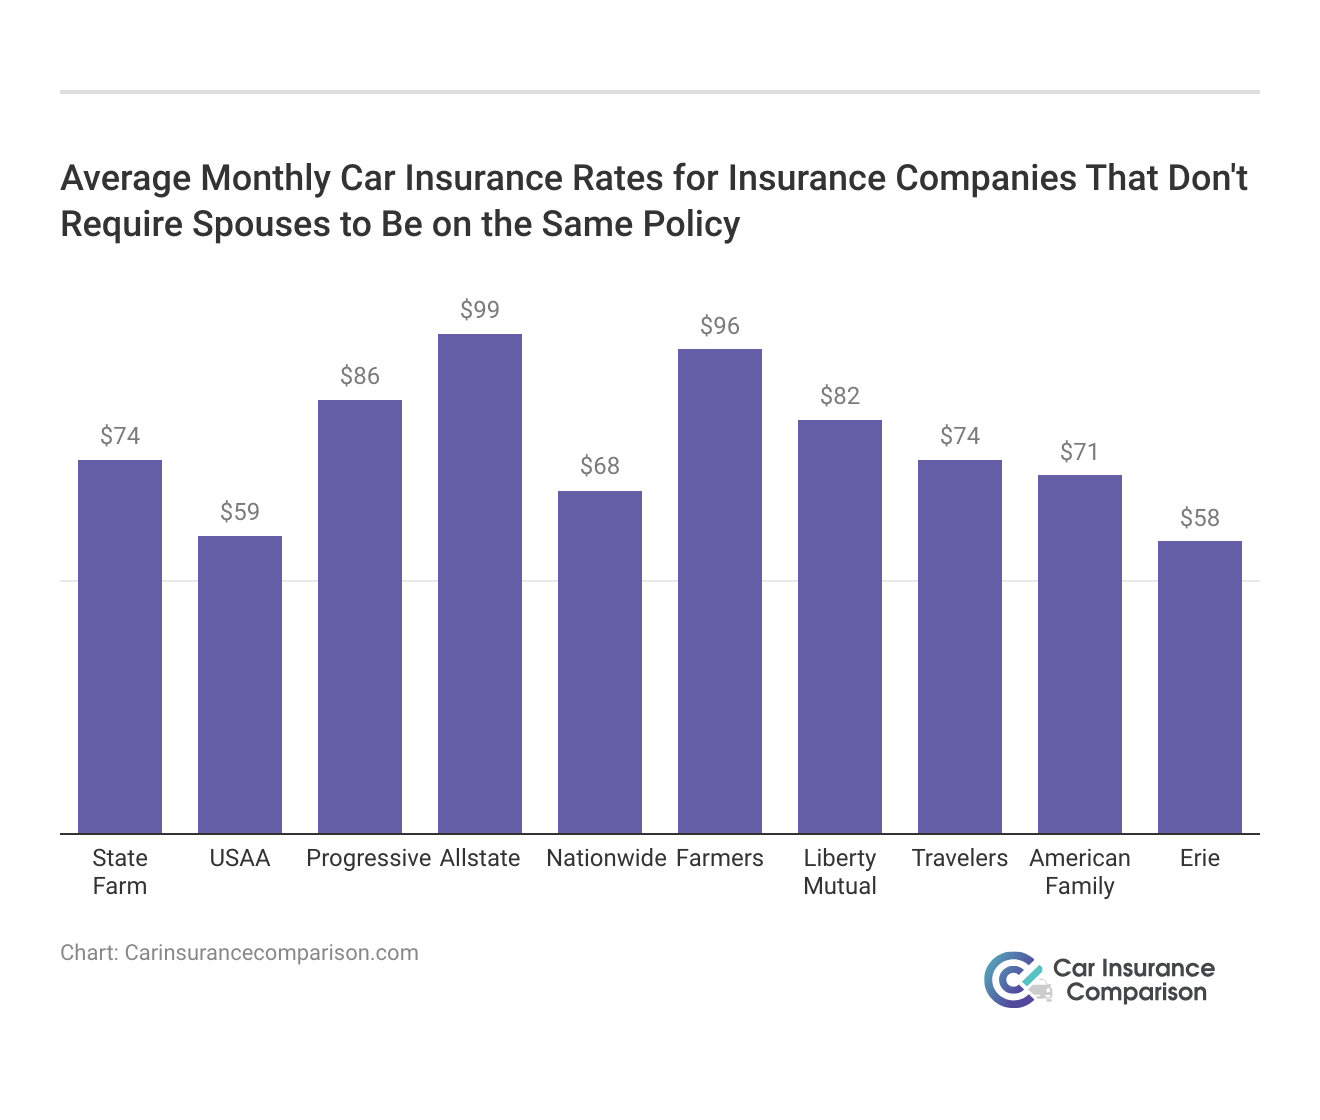 <h3>Average Monthly Car Insurance Rates for Insurance Companies That Don't Require Spouses to Be on the Same Policy</h3>